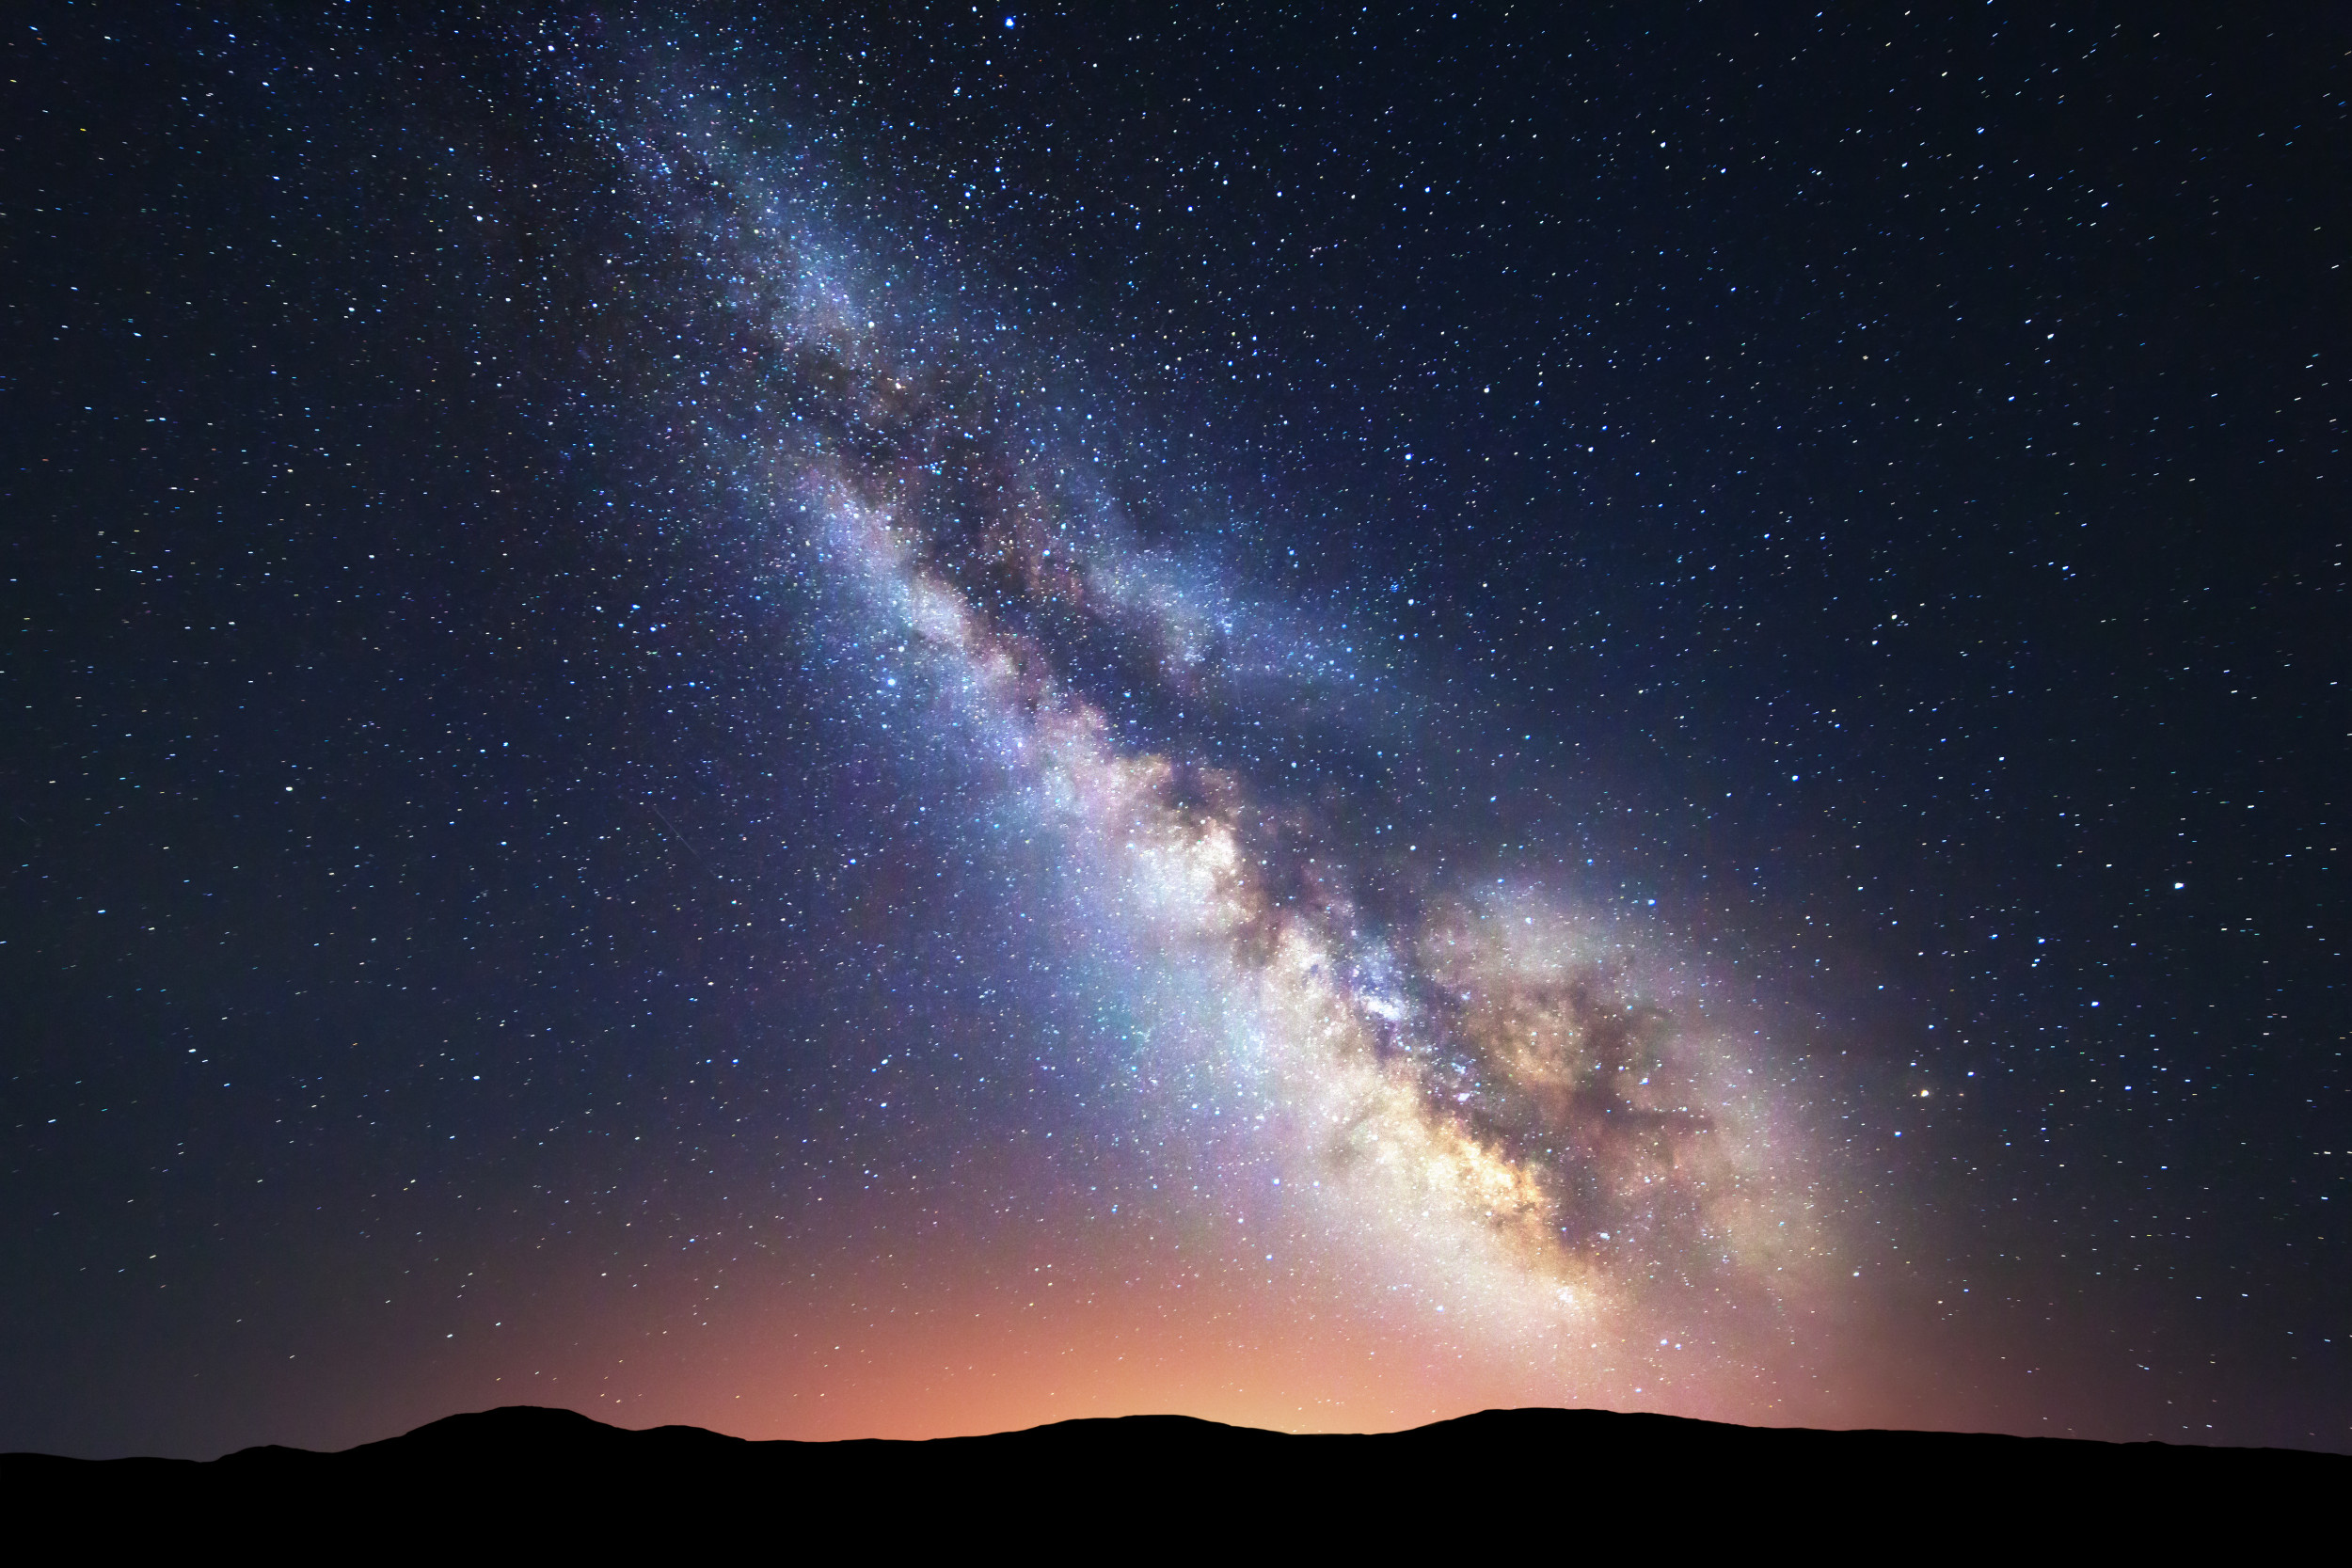 The Milky Way's shape could actually be normal